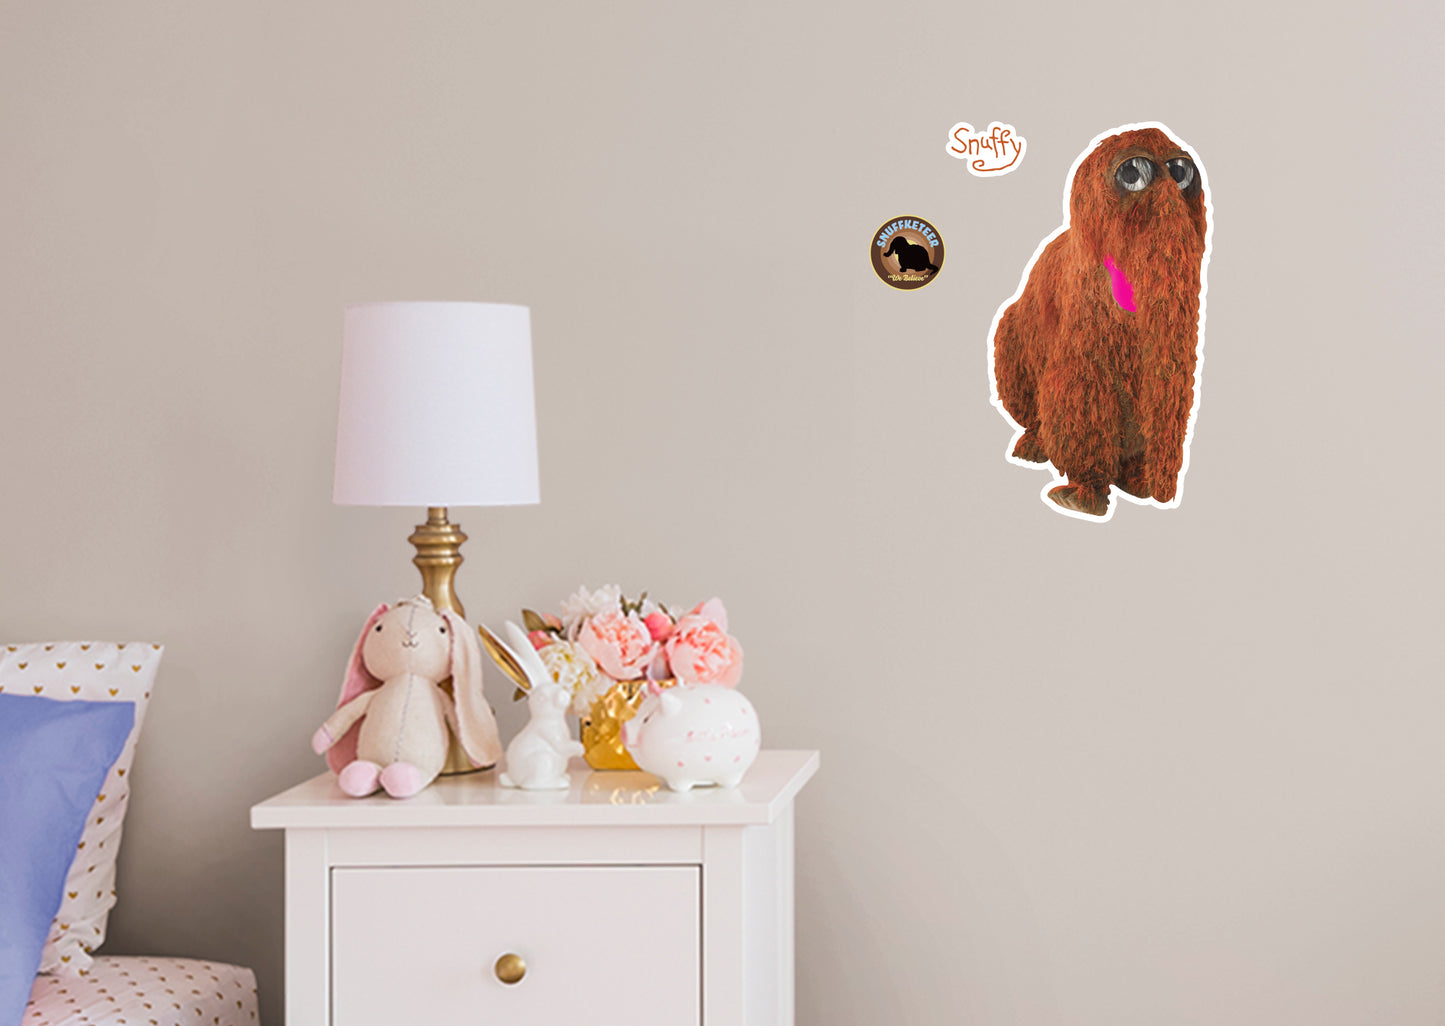 Snuffleupagus RealBig - Officially Licensed Sesame Street Removable Adhesive Decal